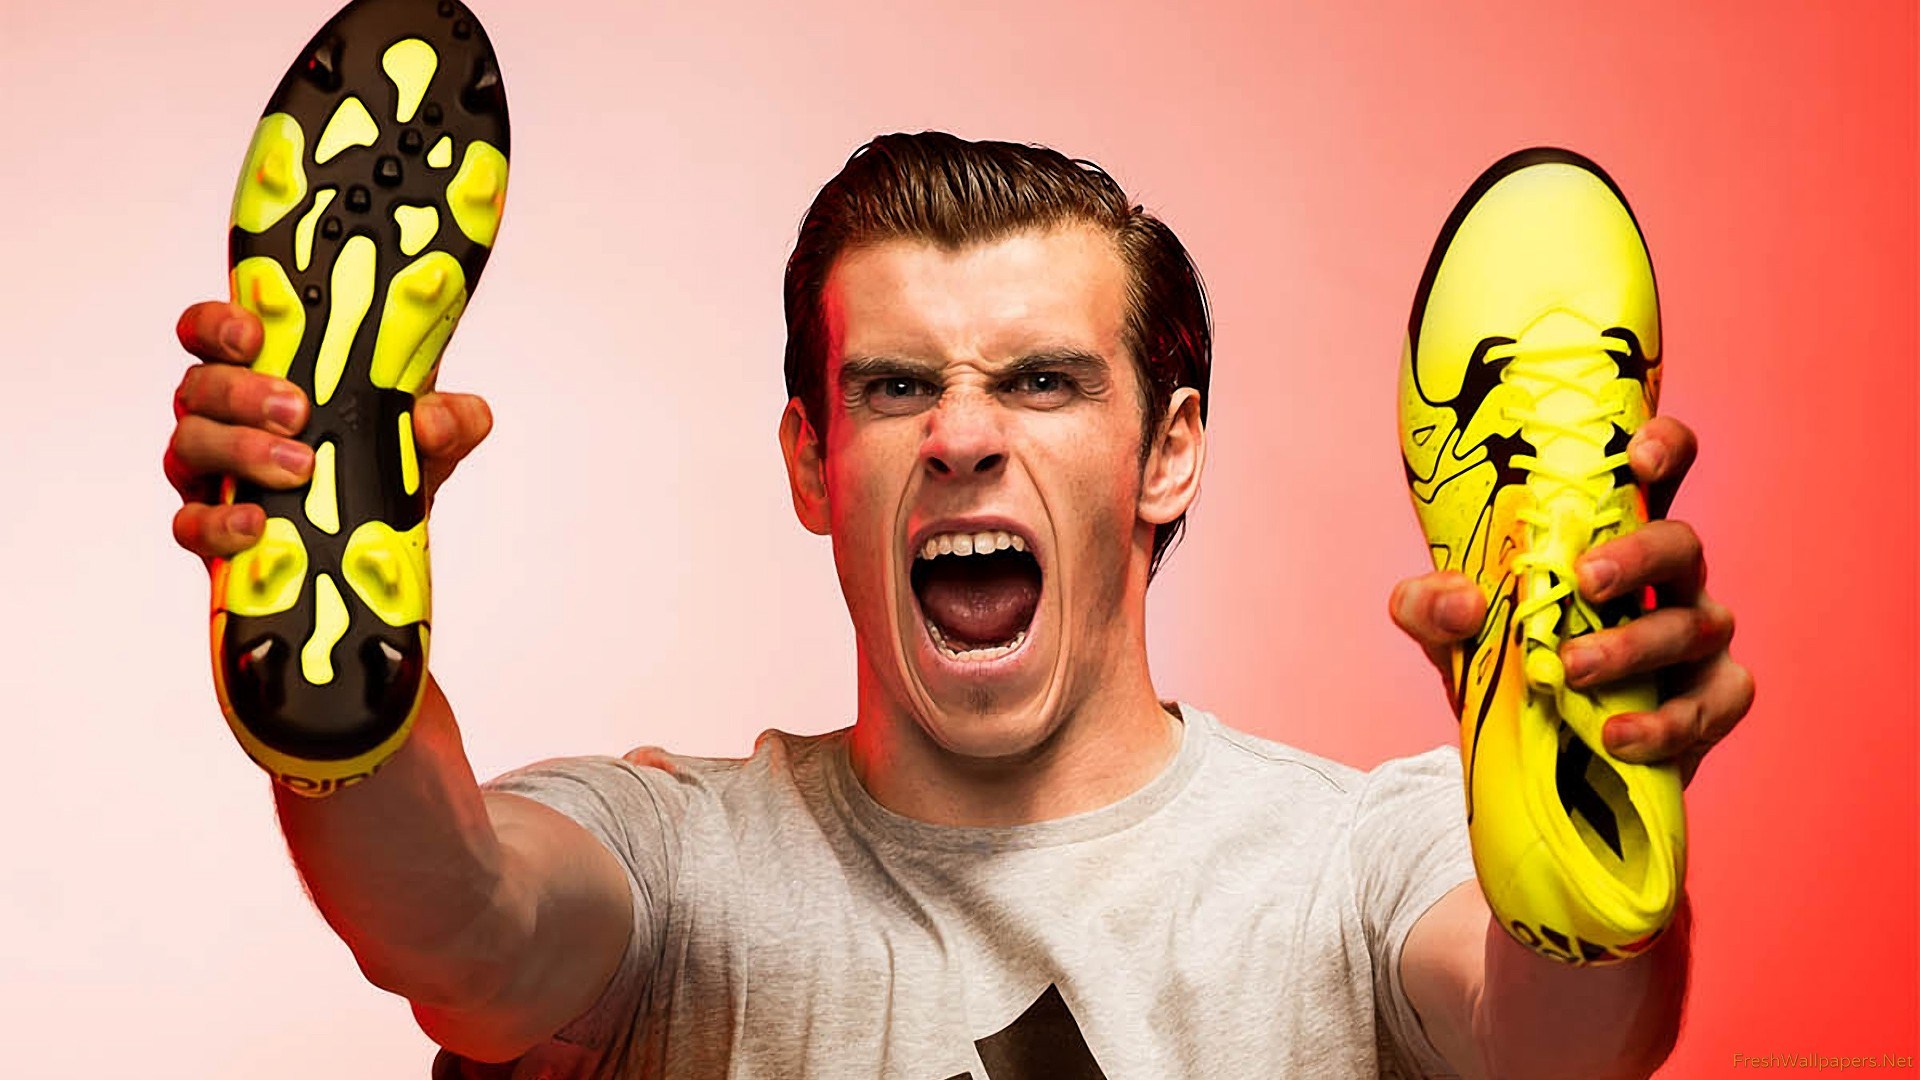 Gareth Bale Wallpapers Pictures Images - Gareth Bale 2016 Boots , HD Wallpaper & Backgrounds